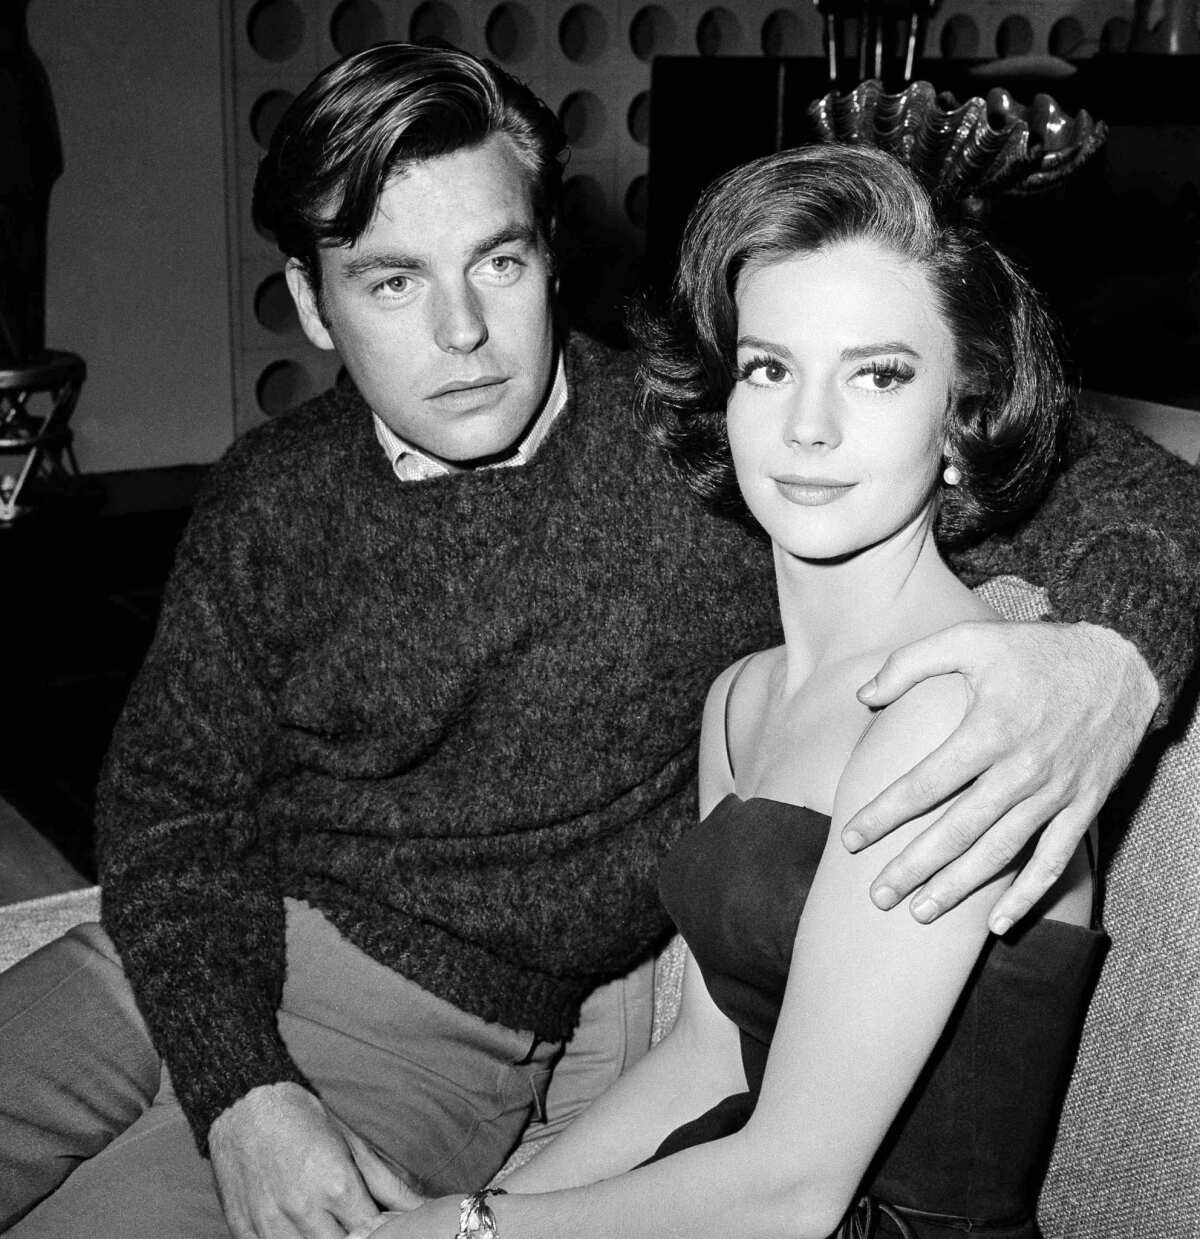 Was Natalie Wood's death really an accident? The L.A. County sheriff's office isn't so sure after comments made by a ship captain who was there the night the actress died. Now, they plan to reopen the case to find out what really happened. As the story goes, Wood, 43, was having drinks with husband, Robert Wagner, actor Christopher Walken and friends aboard a yacht off Catalina on Thanksgiving weekend back in 1981. When she tried to climb into a dinghy, she slipped and fell into the water. Her body was found about a mile away the next morning, with the dinghy beached nearby.